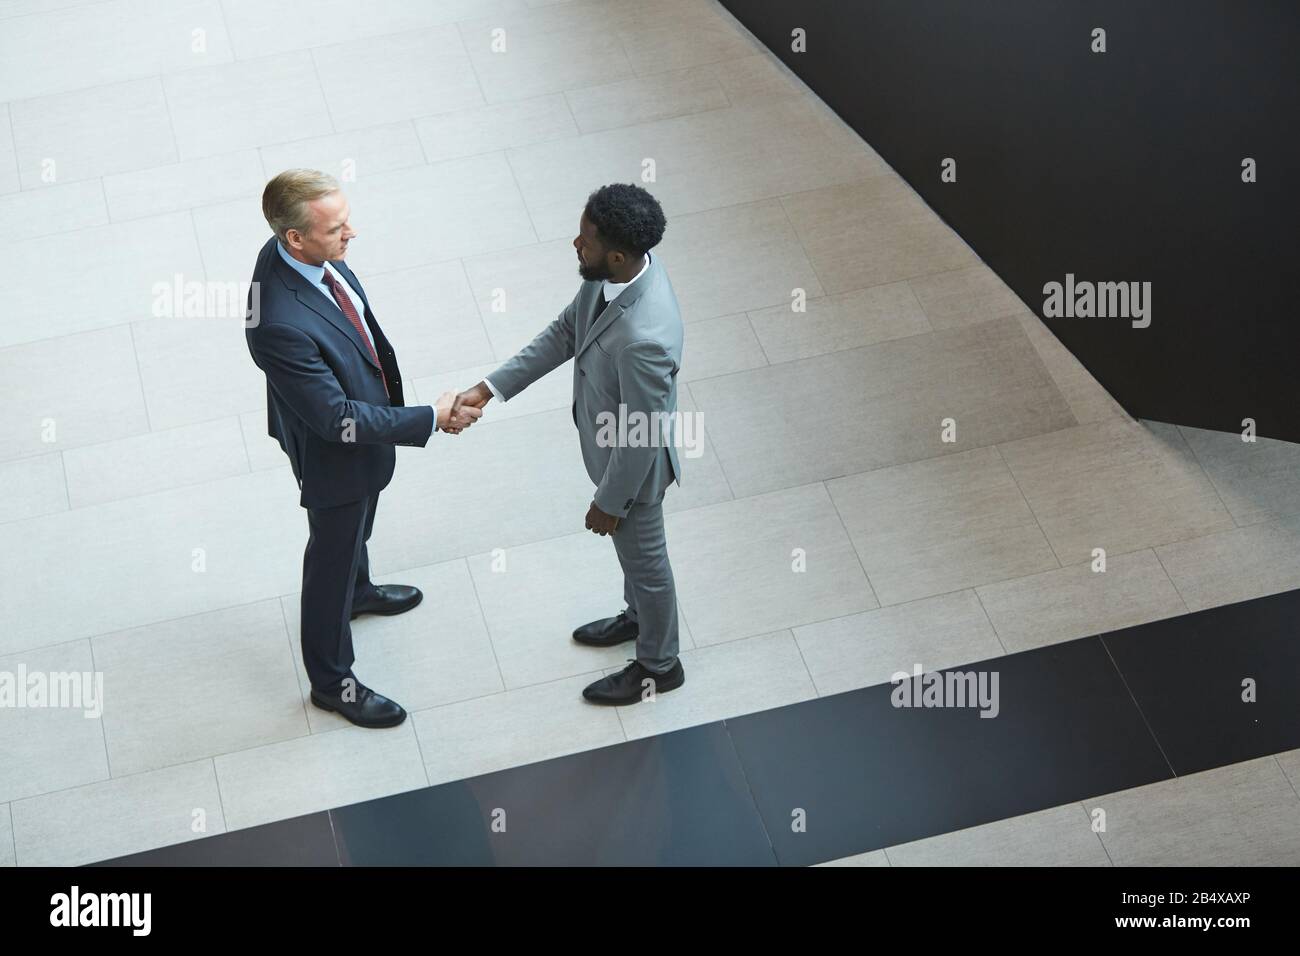 Horizontal high angle shot of two modern men wearing suits standing in front of each other shaking hands Stock Photo